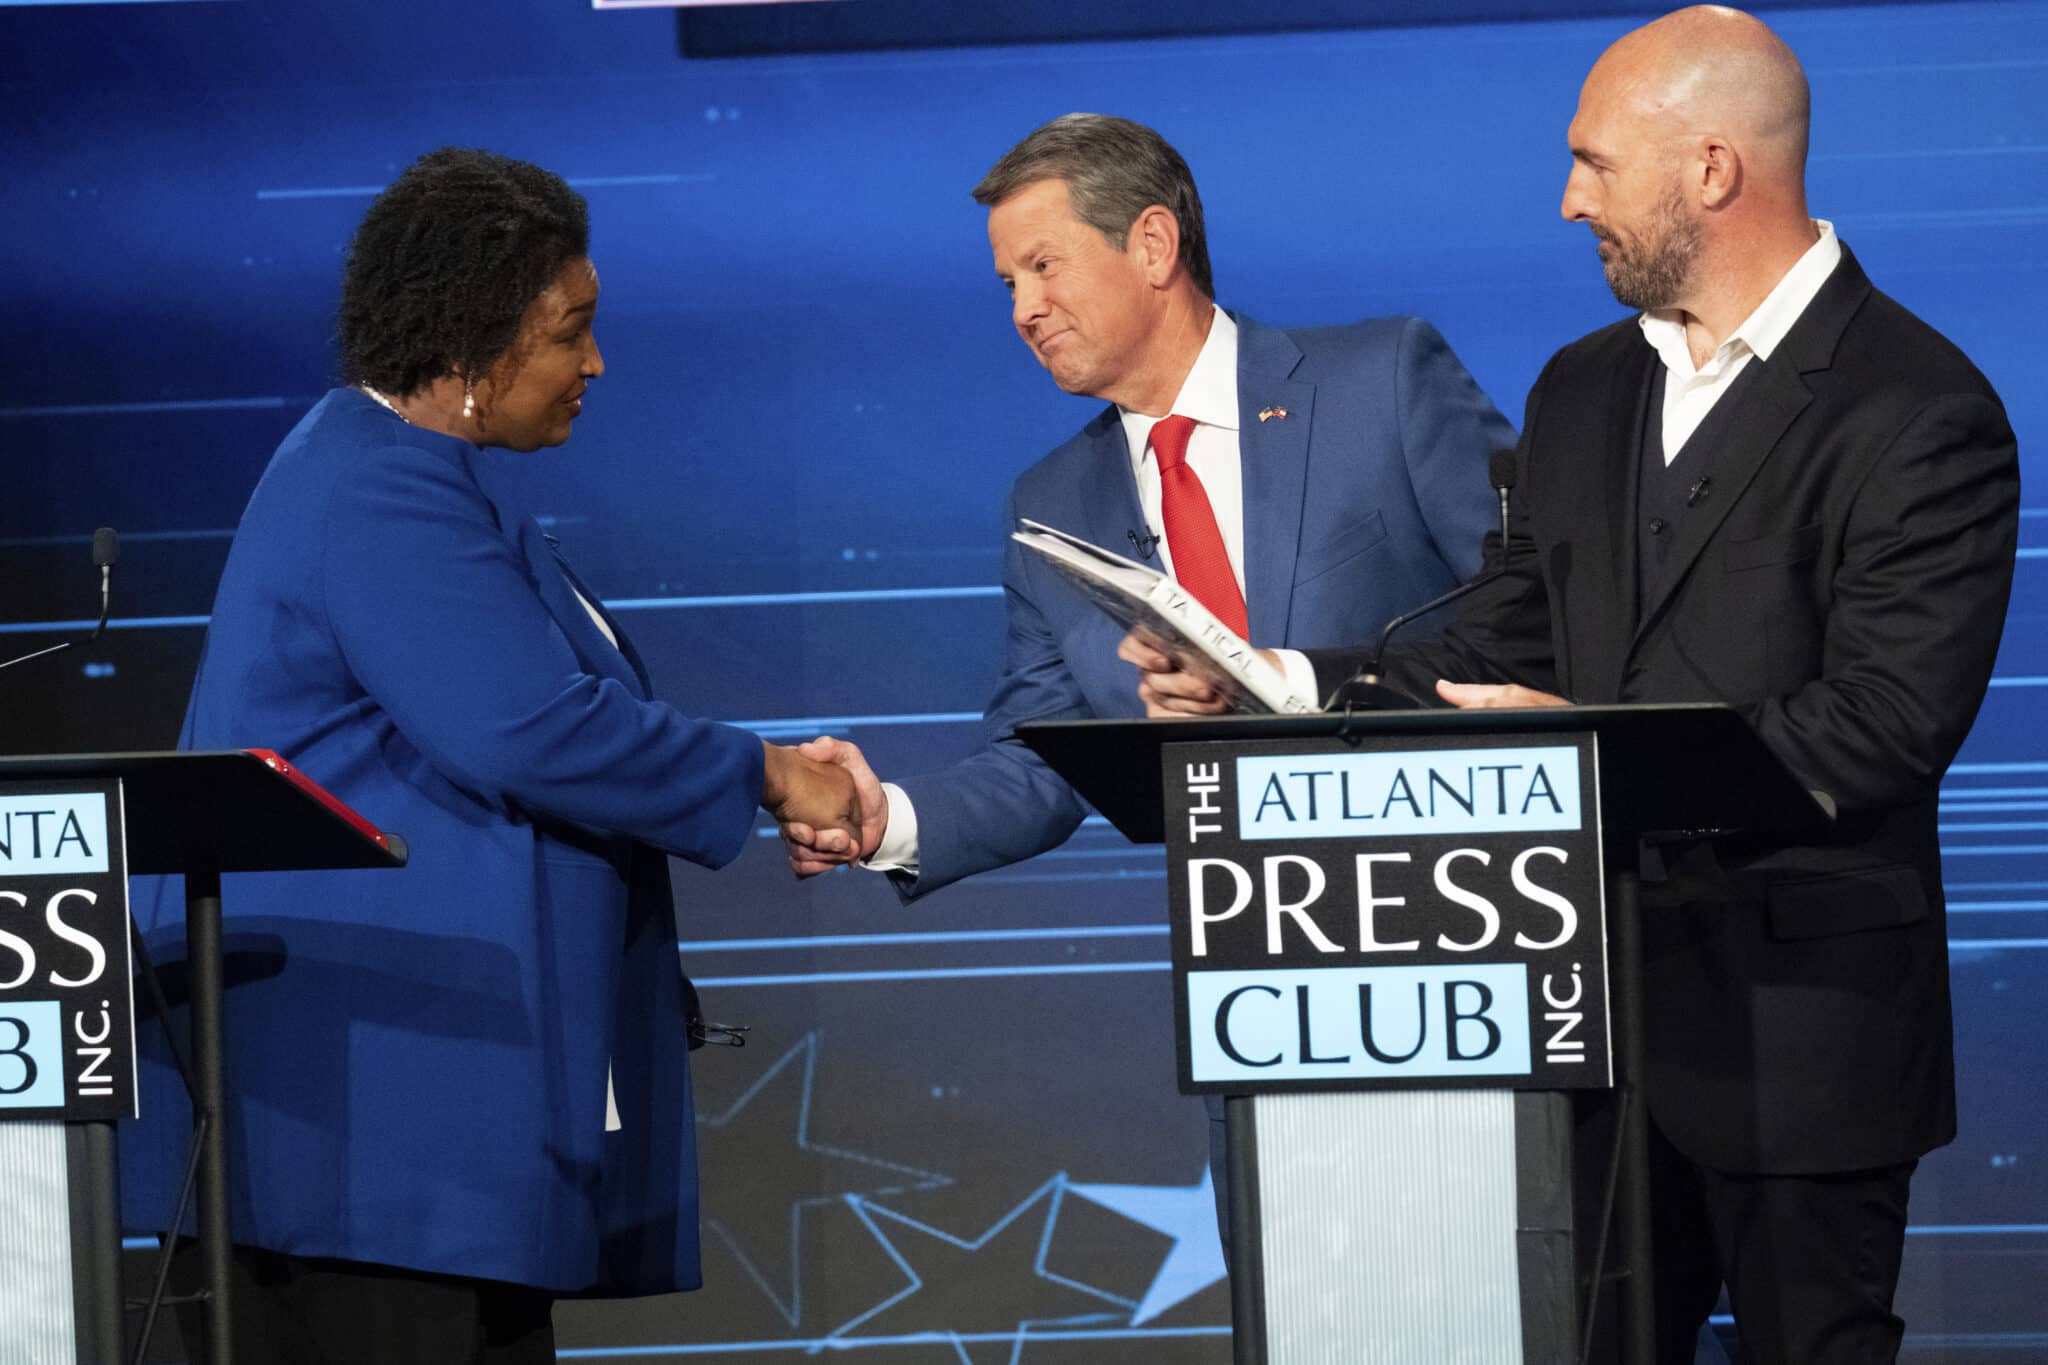 Democratic challenger Stacey Abrams, from left, shakes hands with Georgia Republican Gov. Brian Kemp as Libertarian challenger Shane Hazel stands at right following the Atlanta Press Club Loudermilk-Young Debate Series in Atlanta, Monday, Oct. 17, 2022. (AP Photo/Ben Gray)